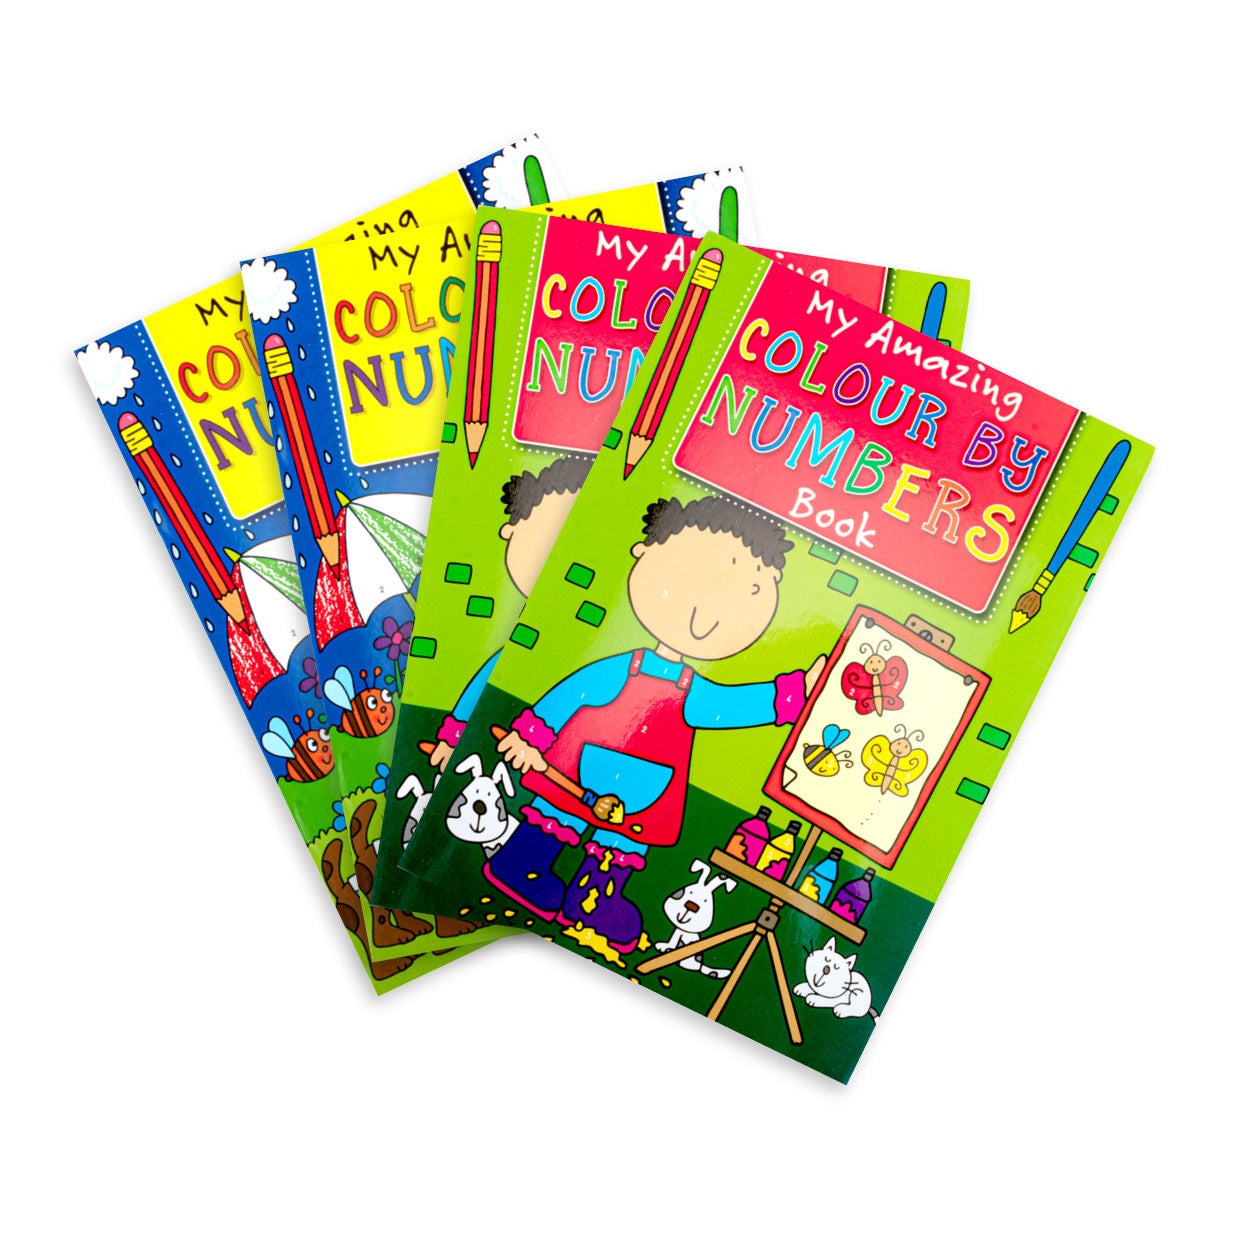 Office Central 4PK Colouring By Numbers Books Fun Relaxing Creative 32PG 295mm x 210mm